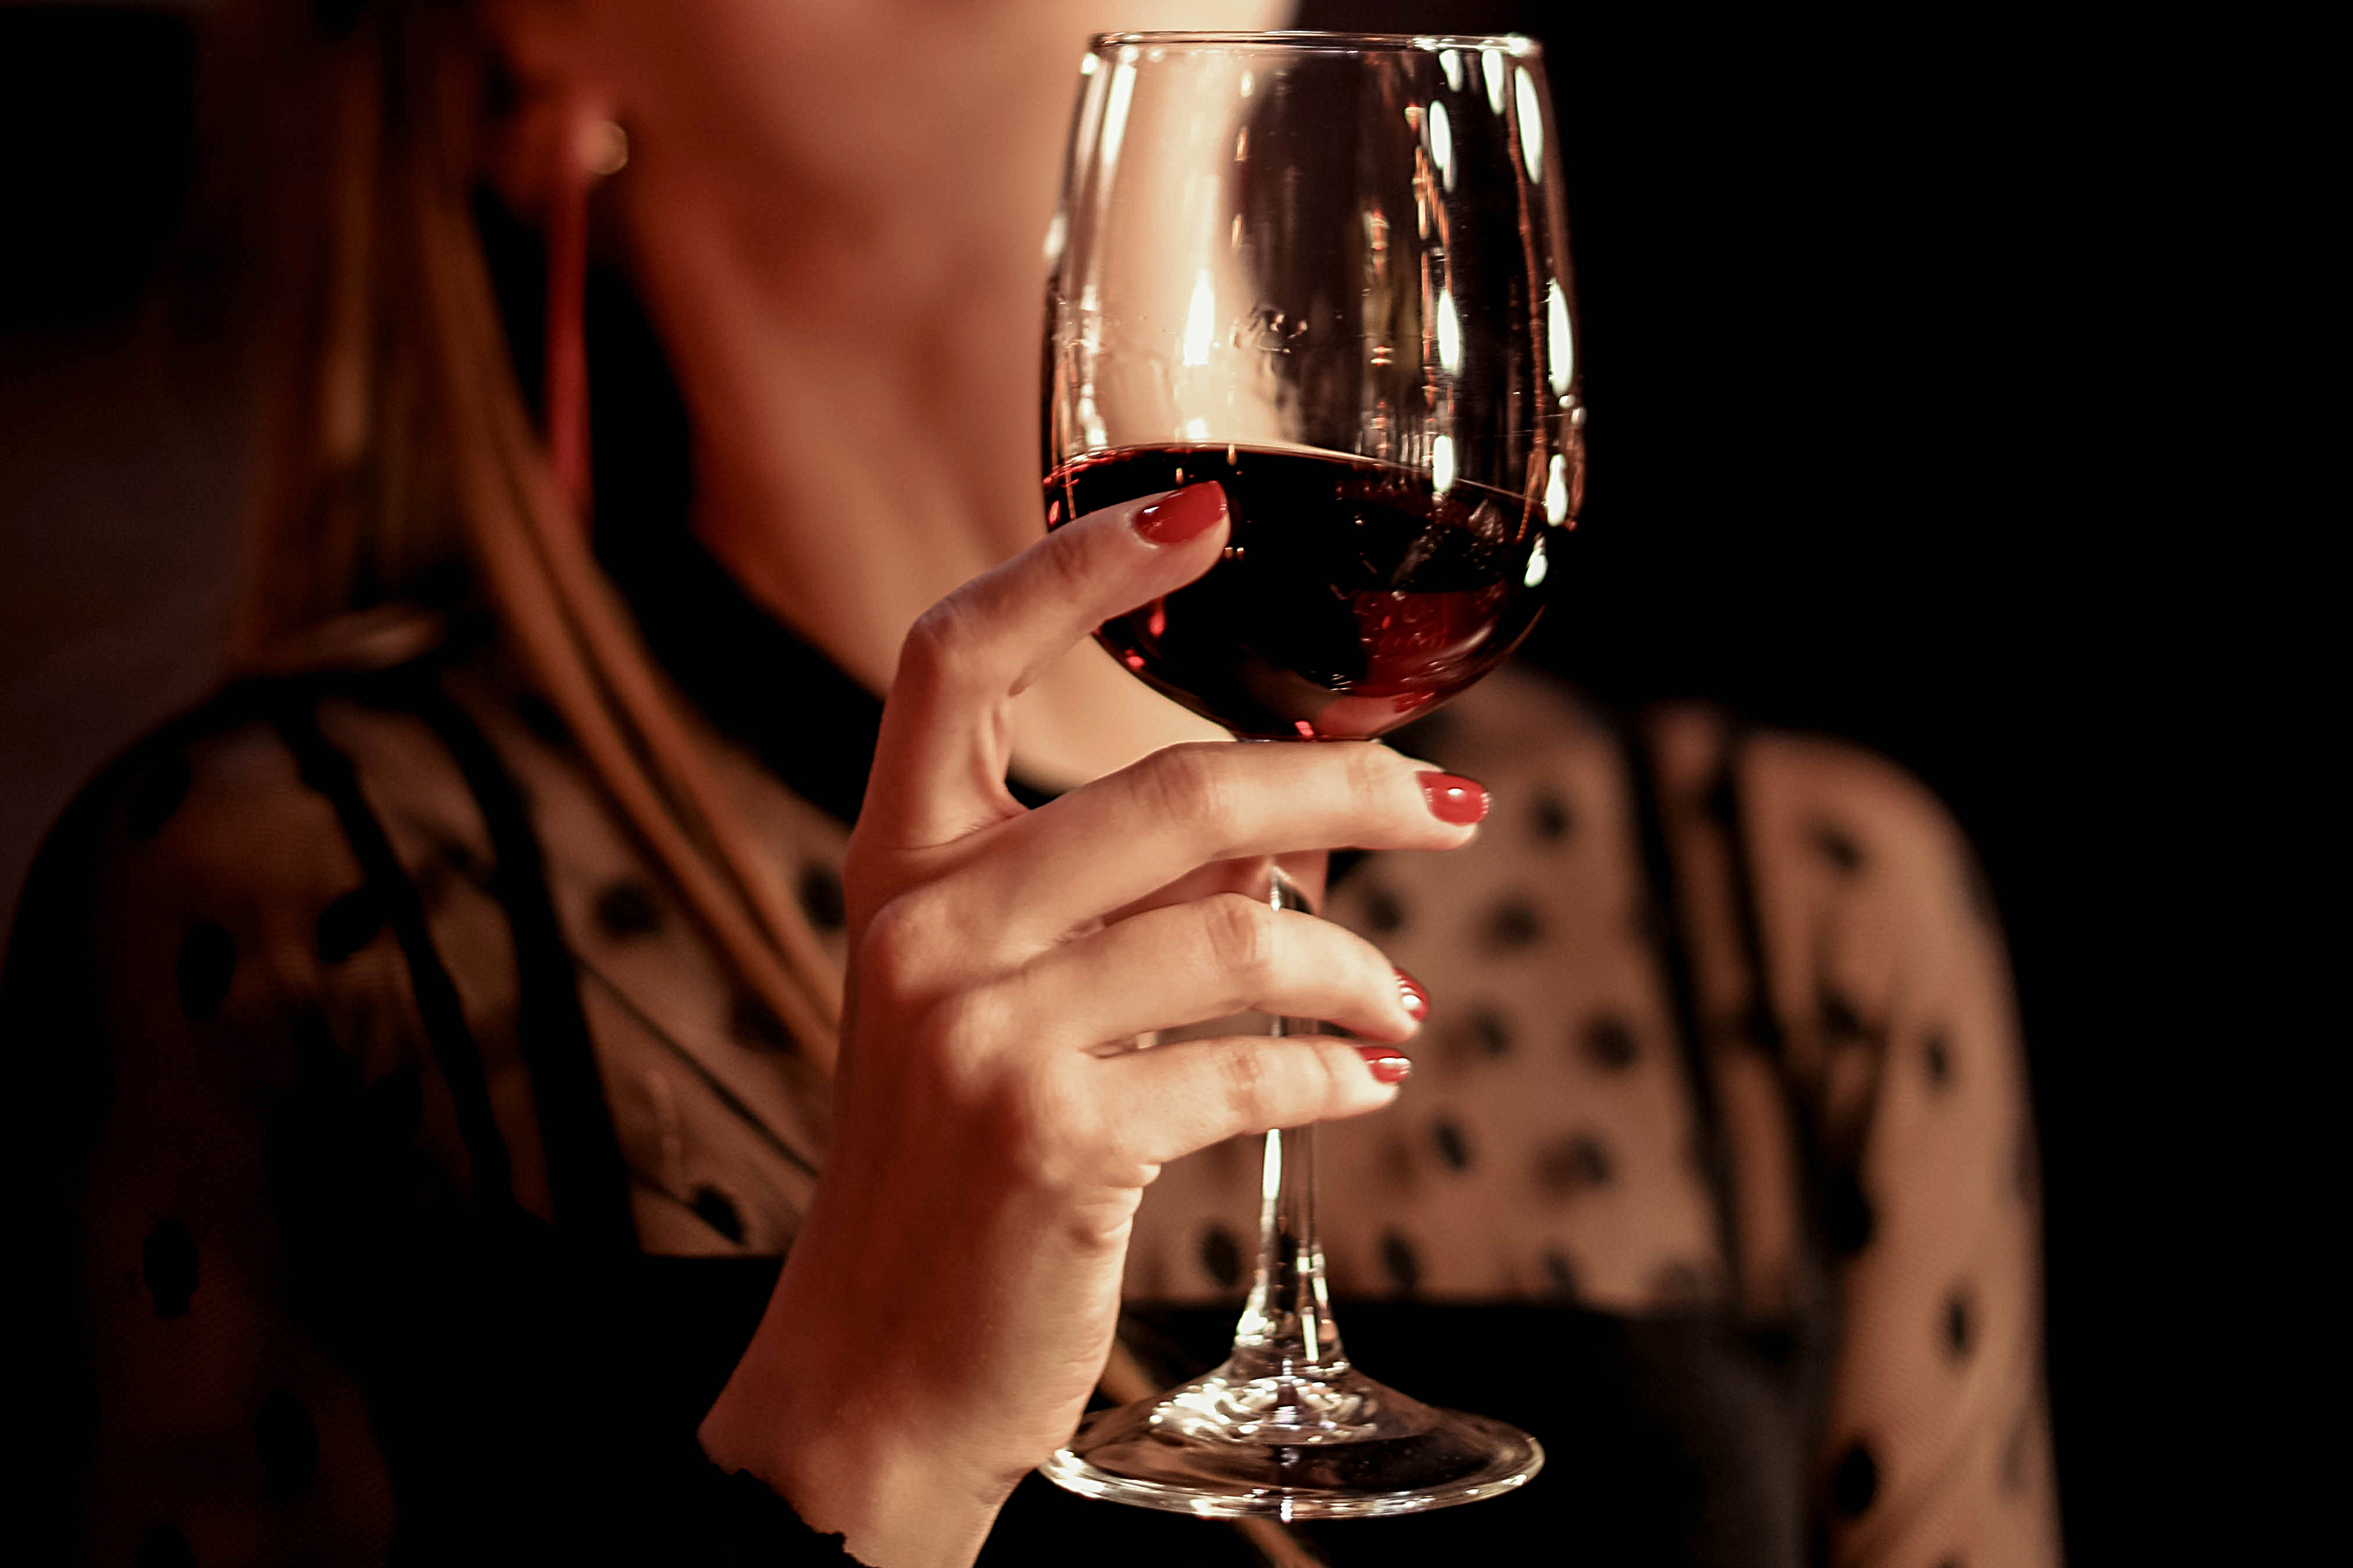 Female hand holding glass of red wine | Source: Shutterstock